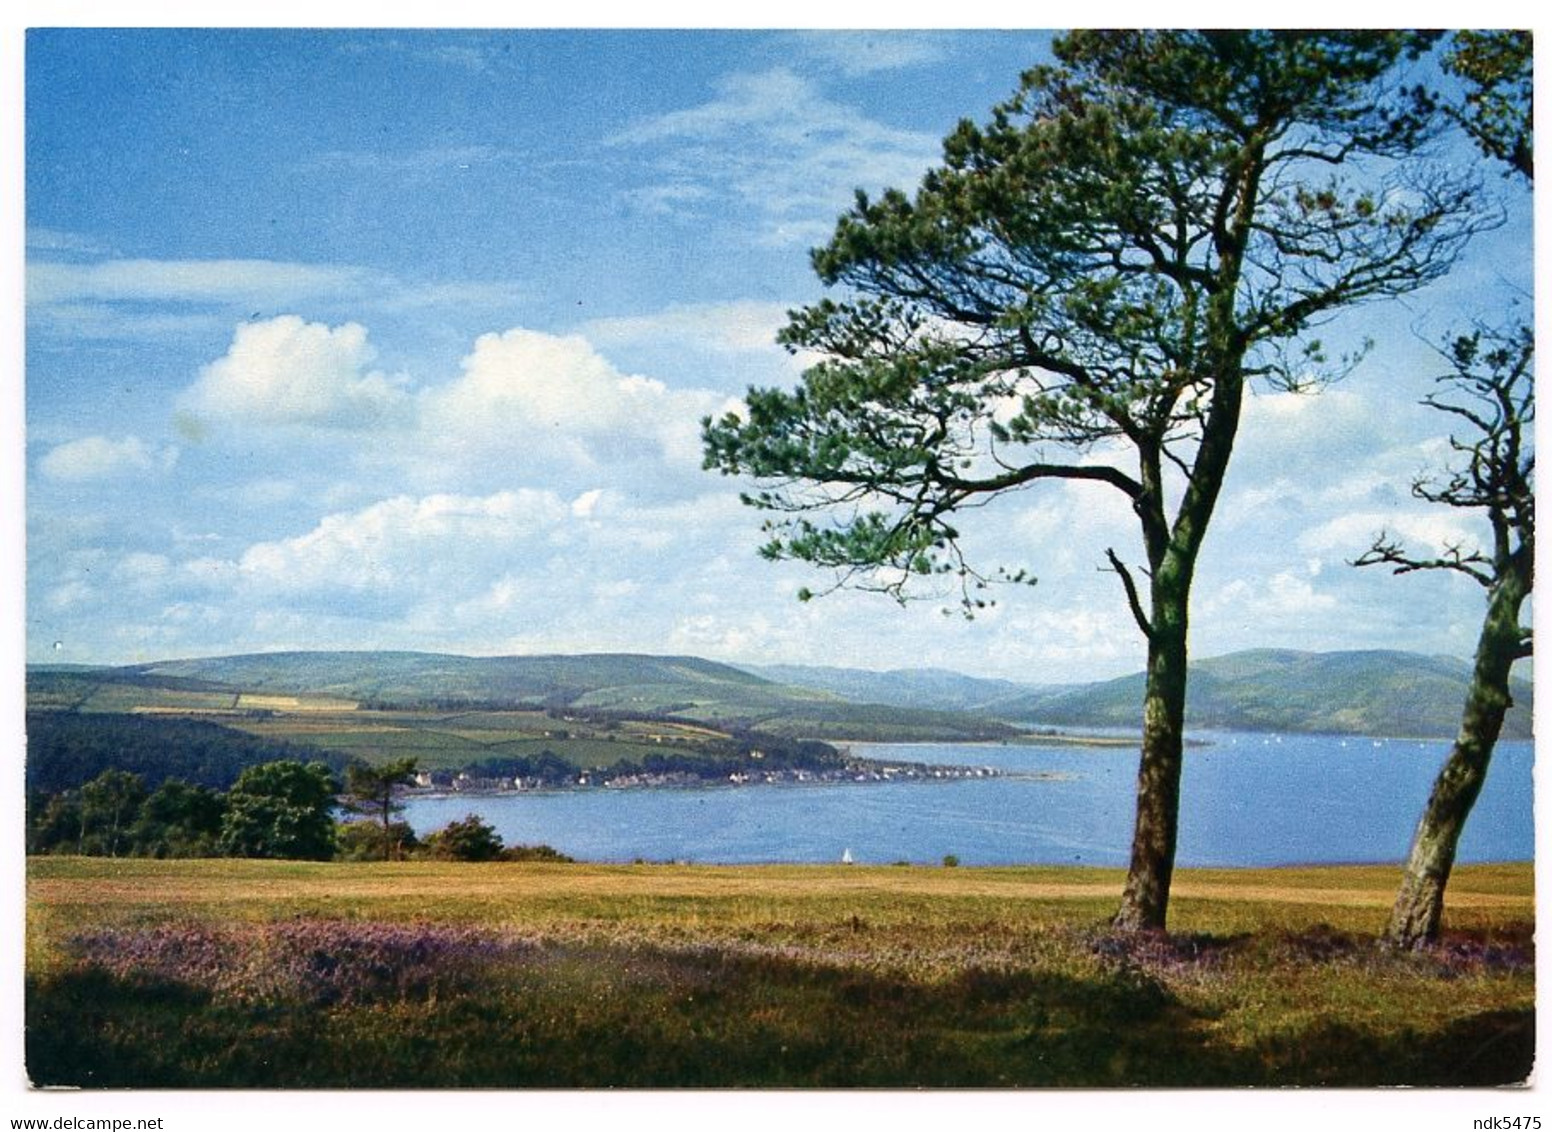 ISHE OF BUTE : ROTHESAY BAY FROM CANADA HILL (10 X 15cms Approx.) - Bute